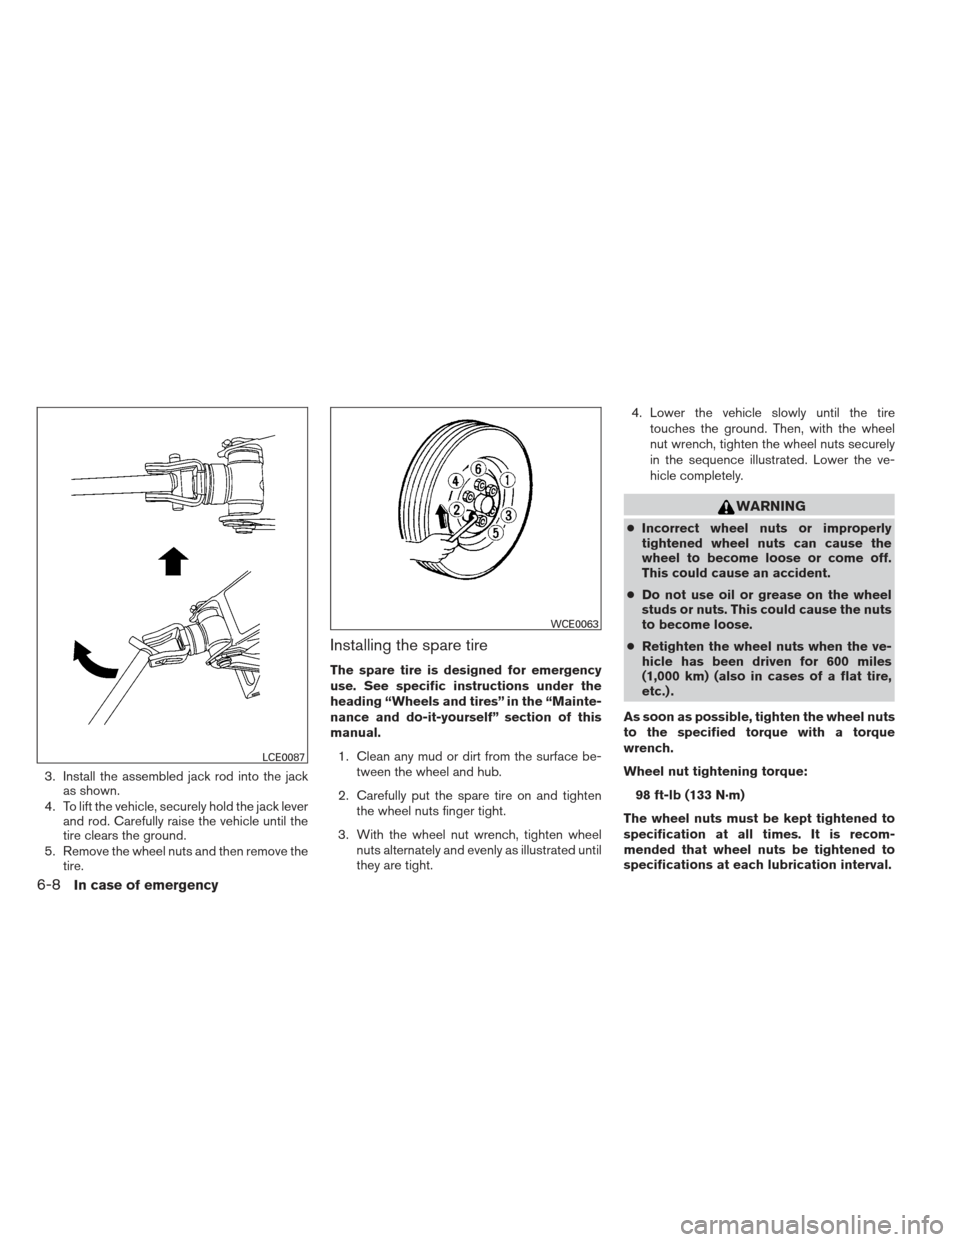 NISSAN XTERRA 2013 N50 / 2.G Owners Manual 3. Install the assembled jack rod into the jackas shown.
4. To lift the vehicle, securely hold the jack lever and rod. Carefully raise the vehicle until the
tire clears the ground.
5. Remove the wheel